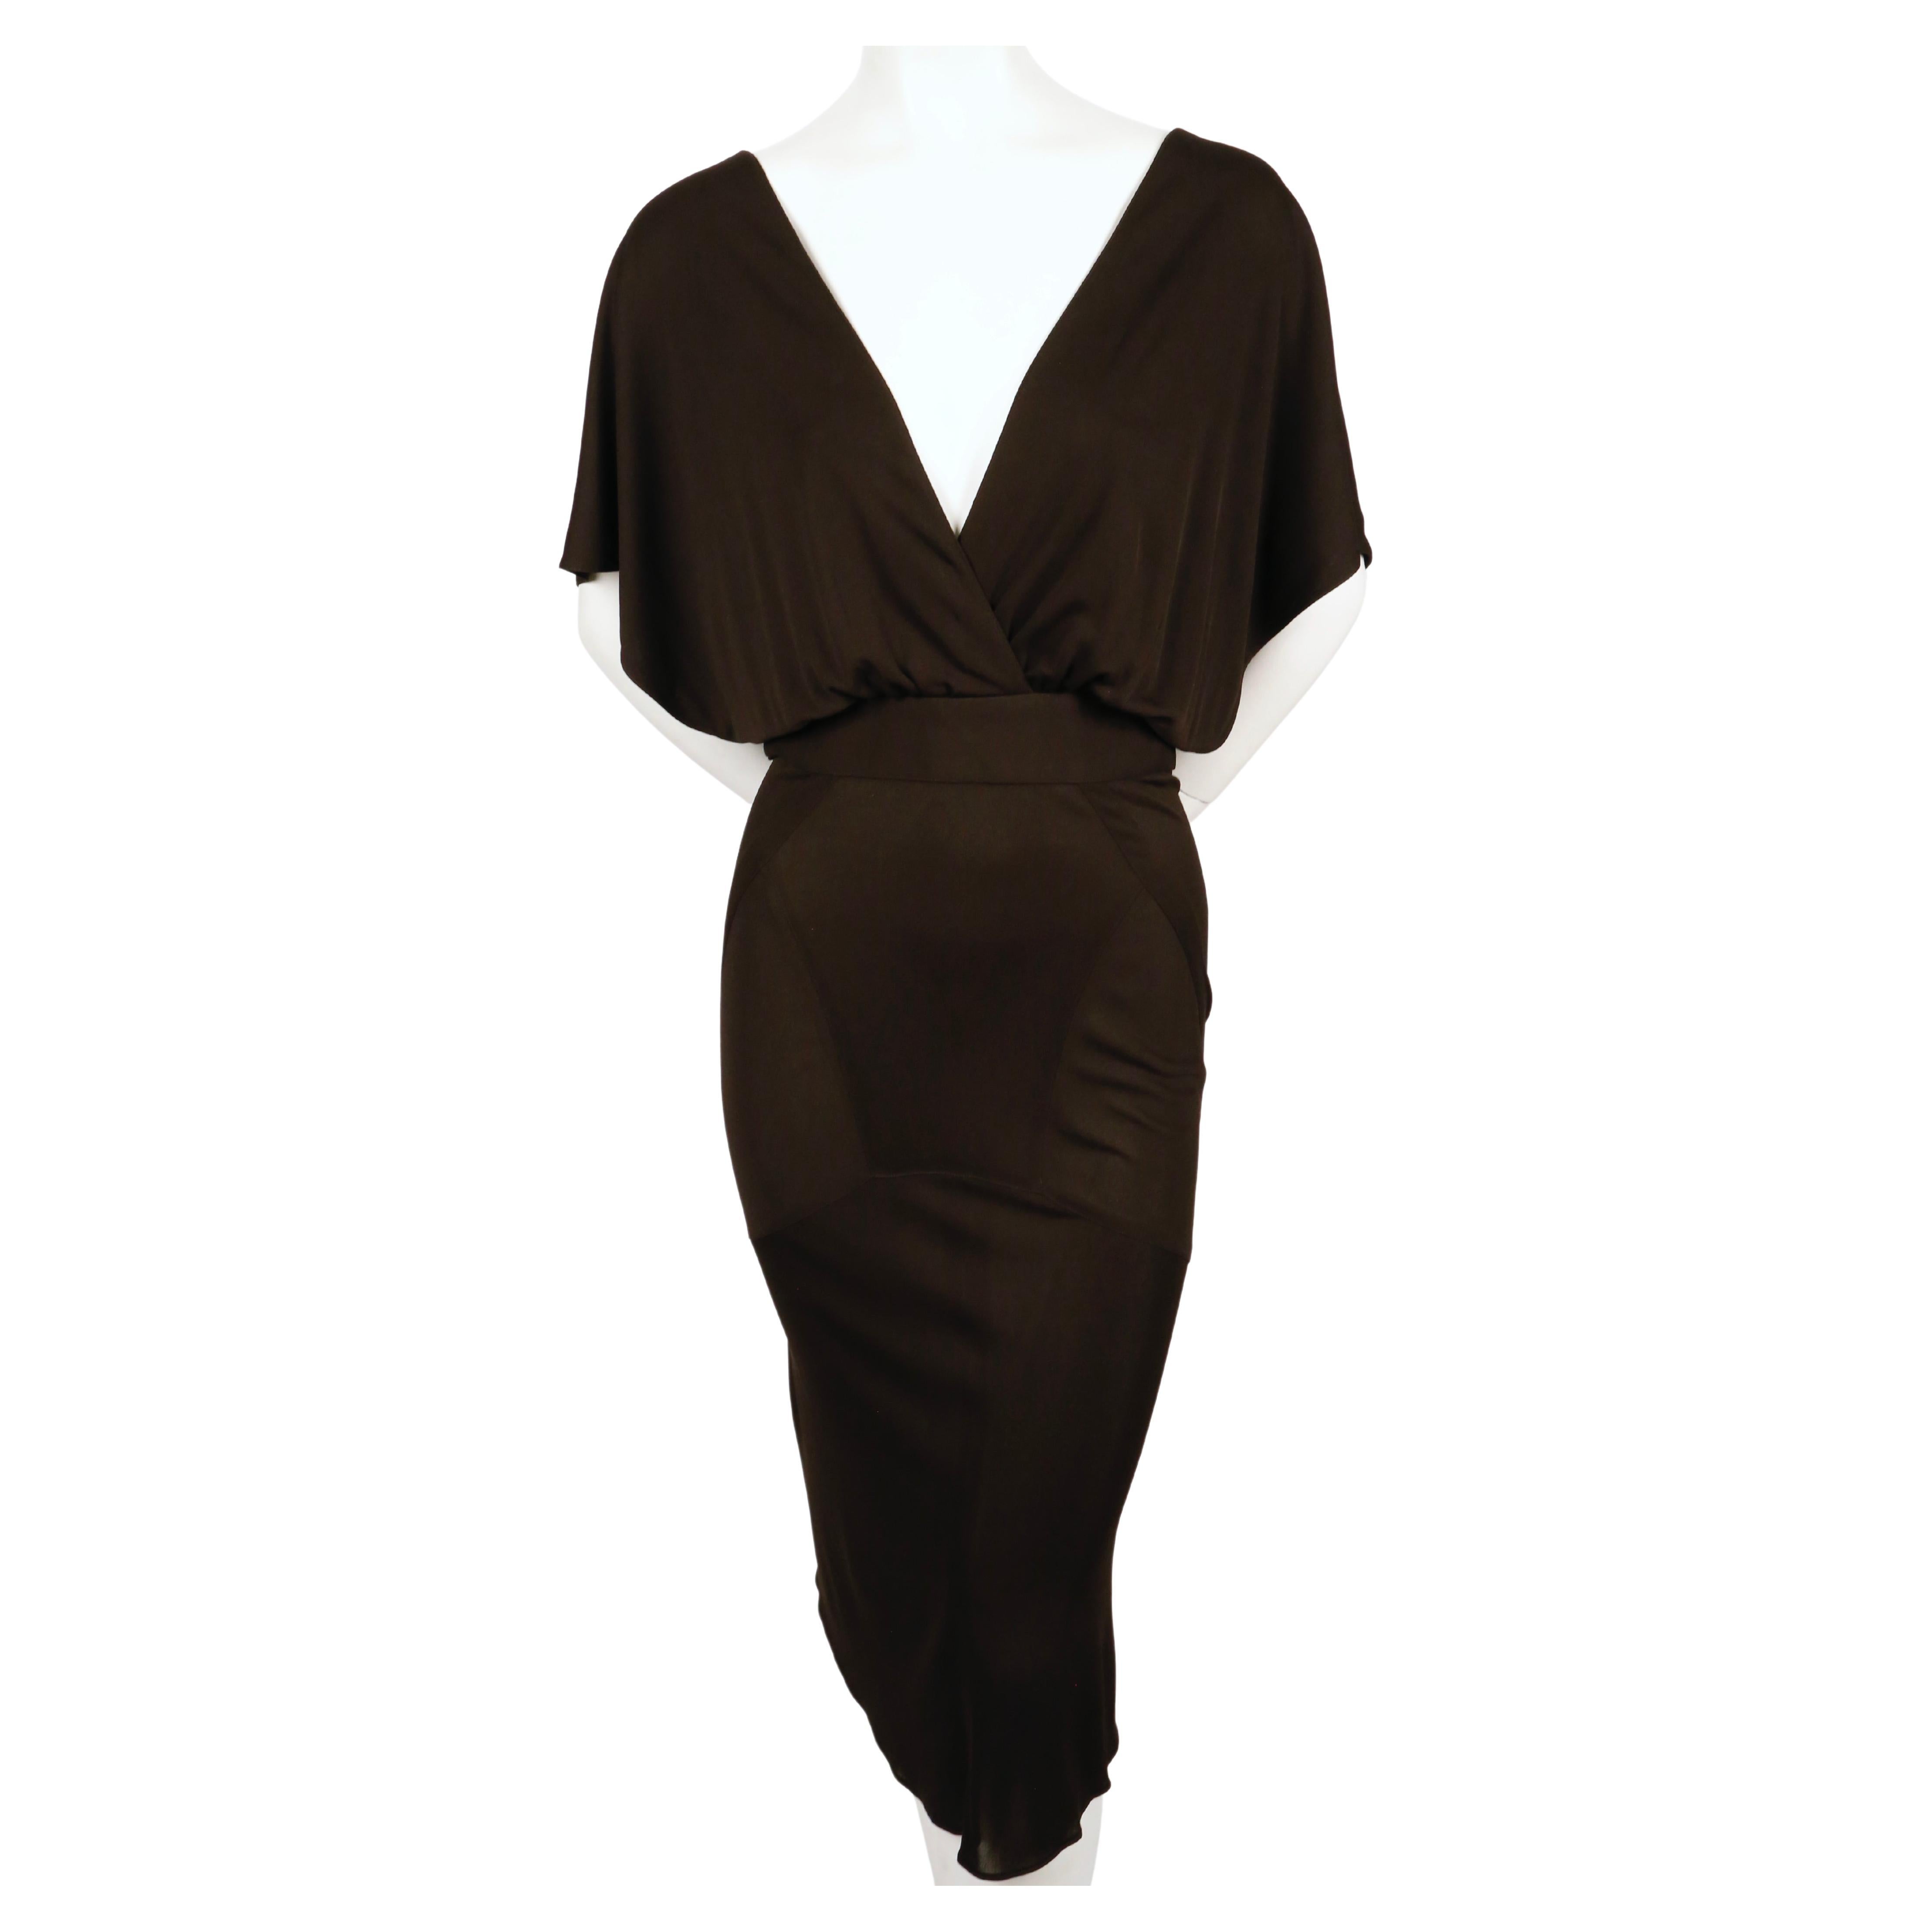 very rare 1984 AZZEDINE ALAIA iconic hooded jersey dress In Excellent Condition For Sale In San Fransisco, CA